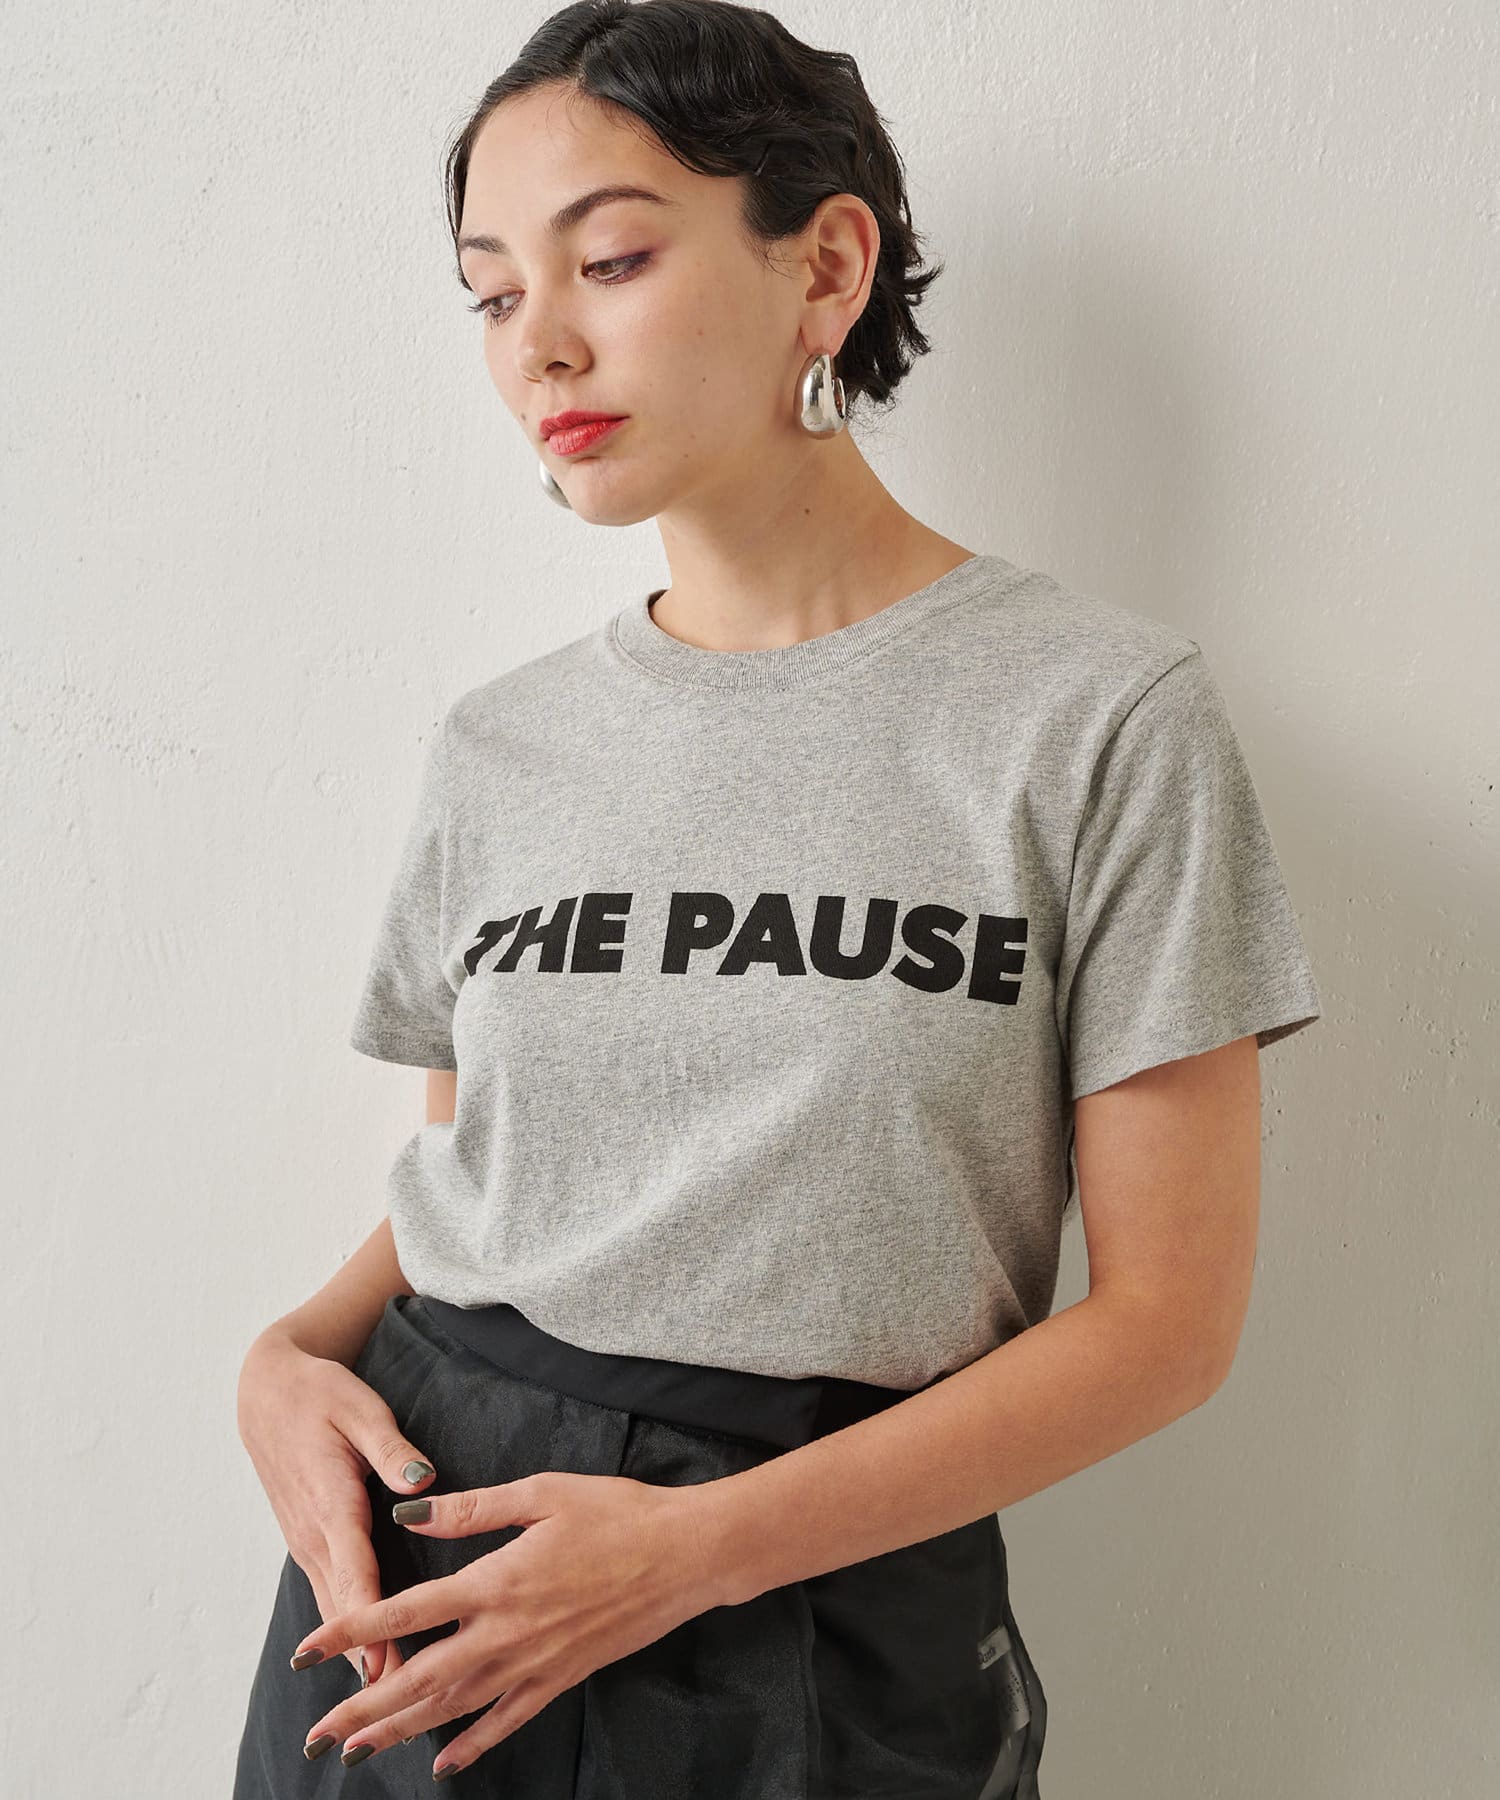 THE PAUSE】THE PAUSE Tシャツ | Whim Gazette(ウィム ガゼット